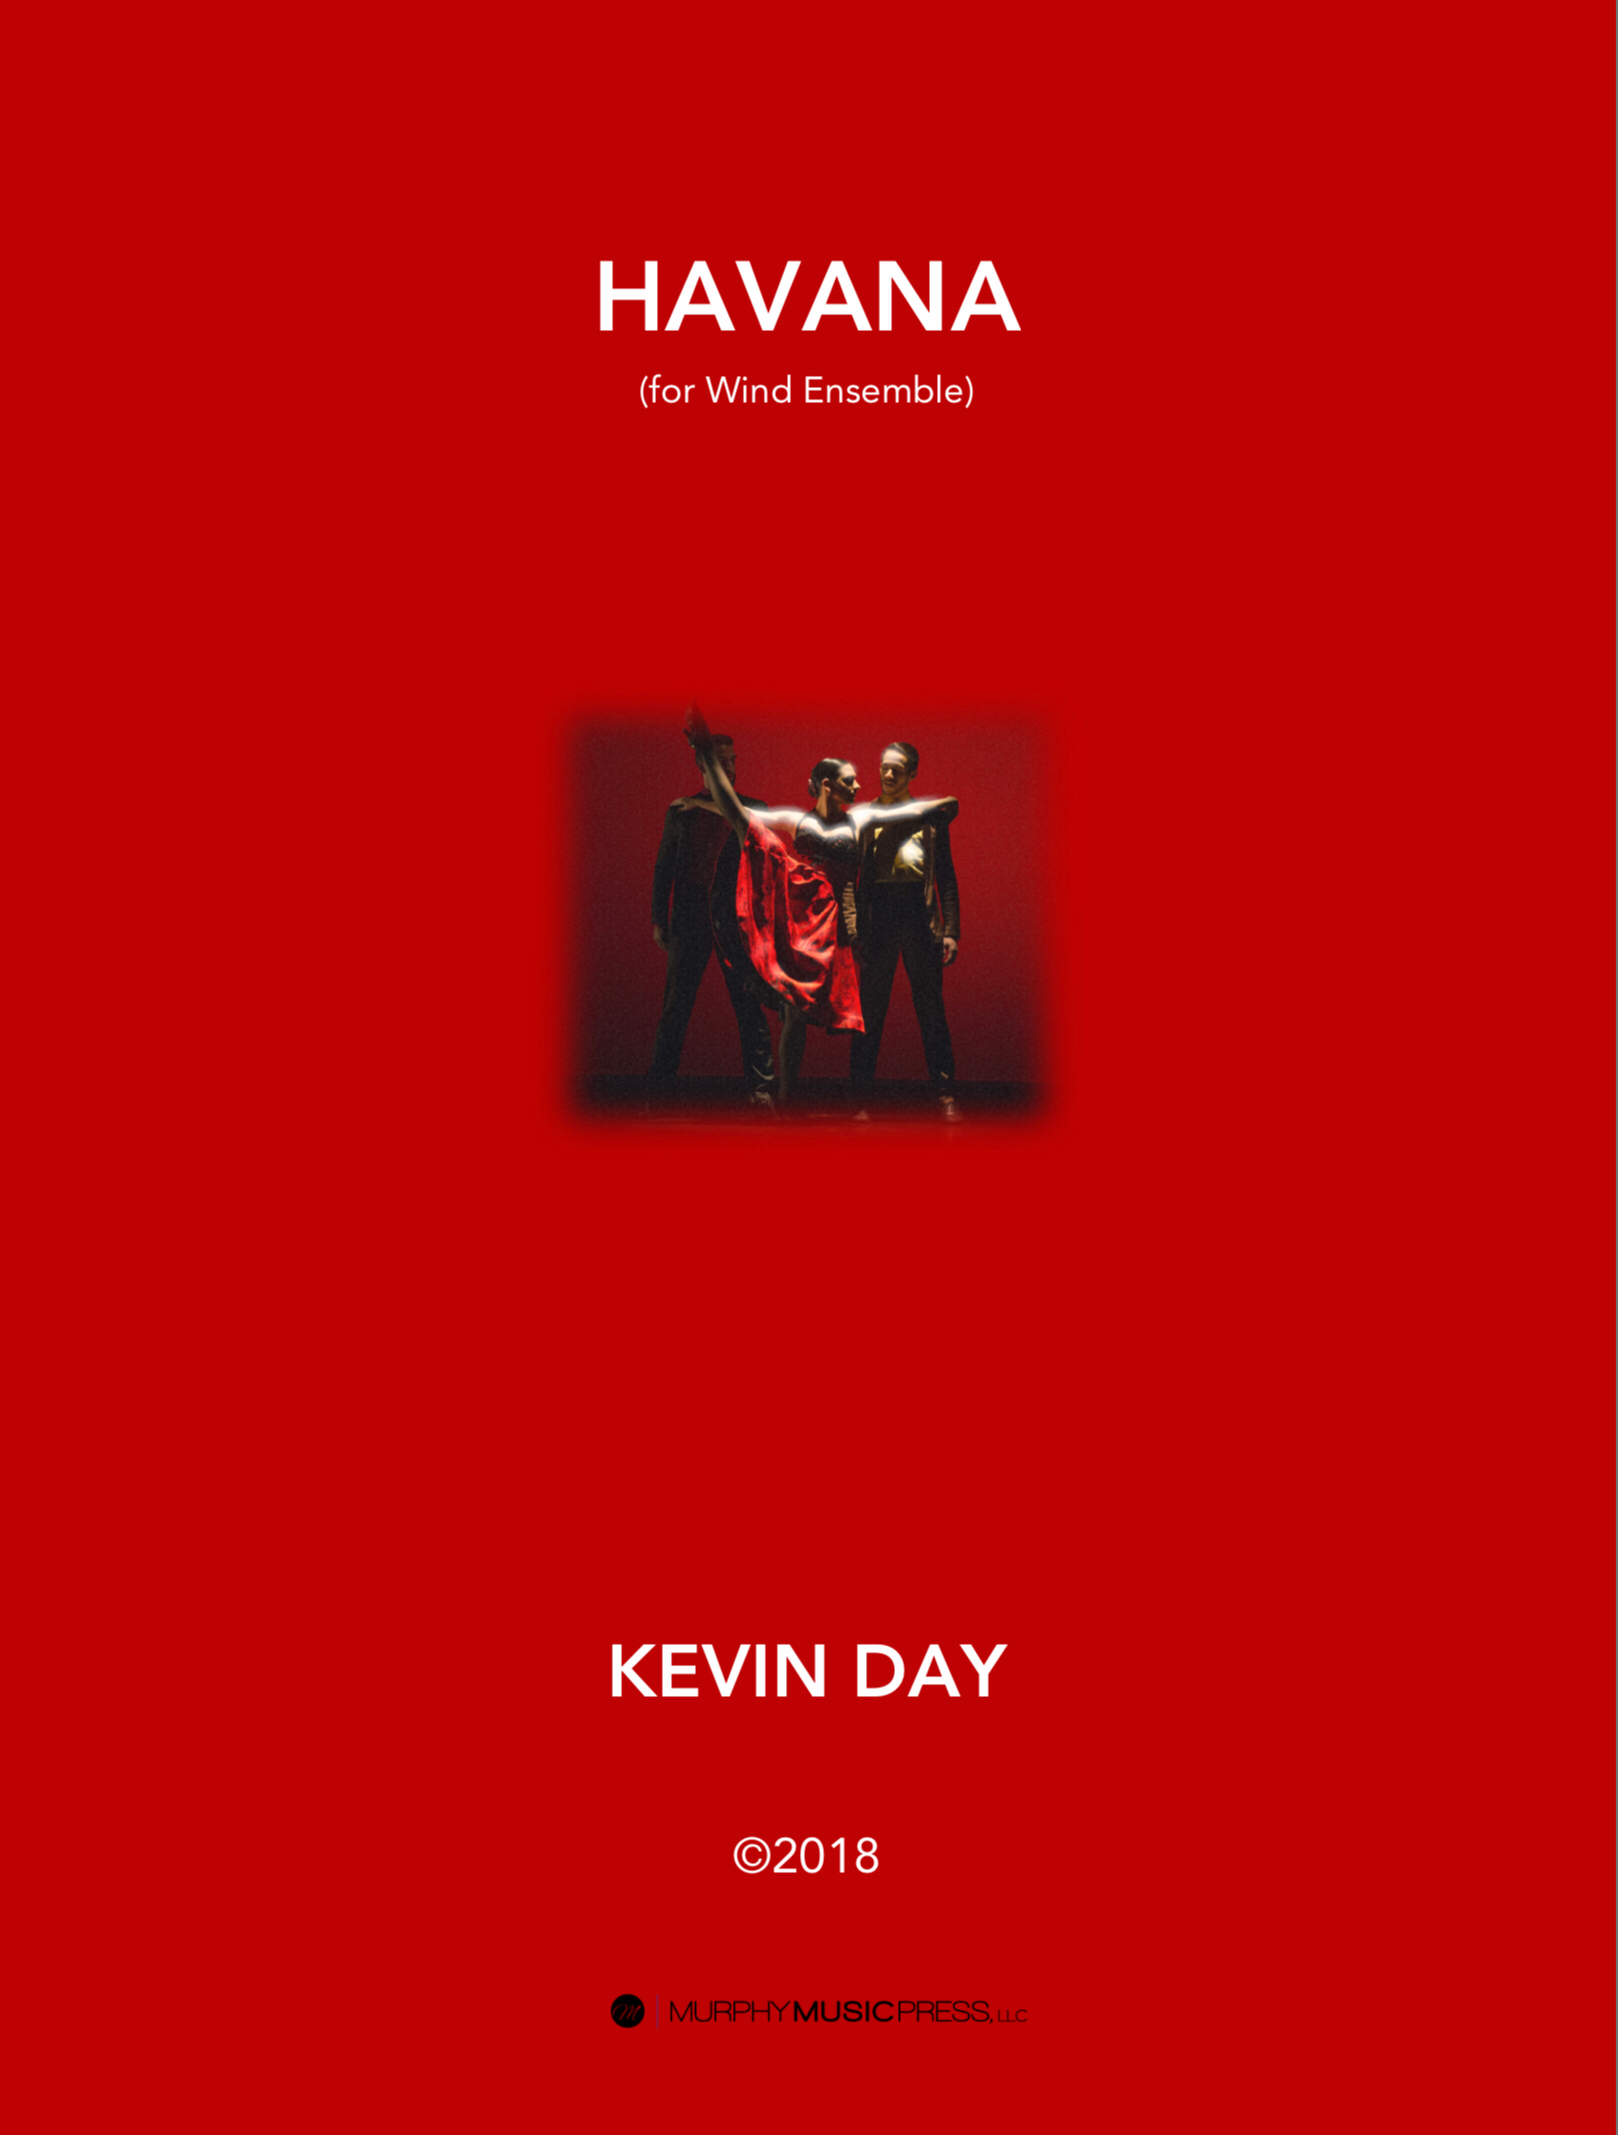 Havana by Kevin Day